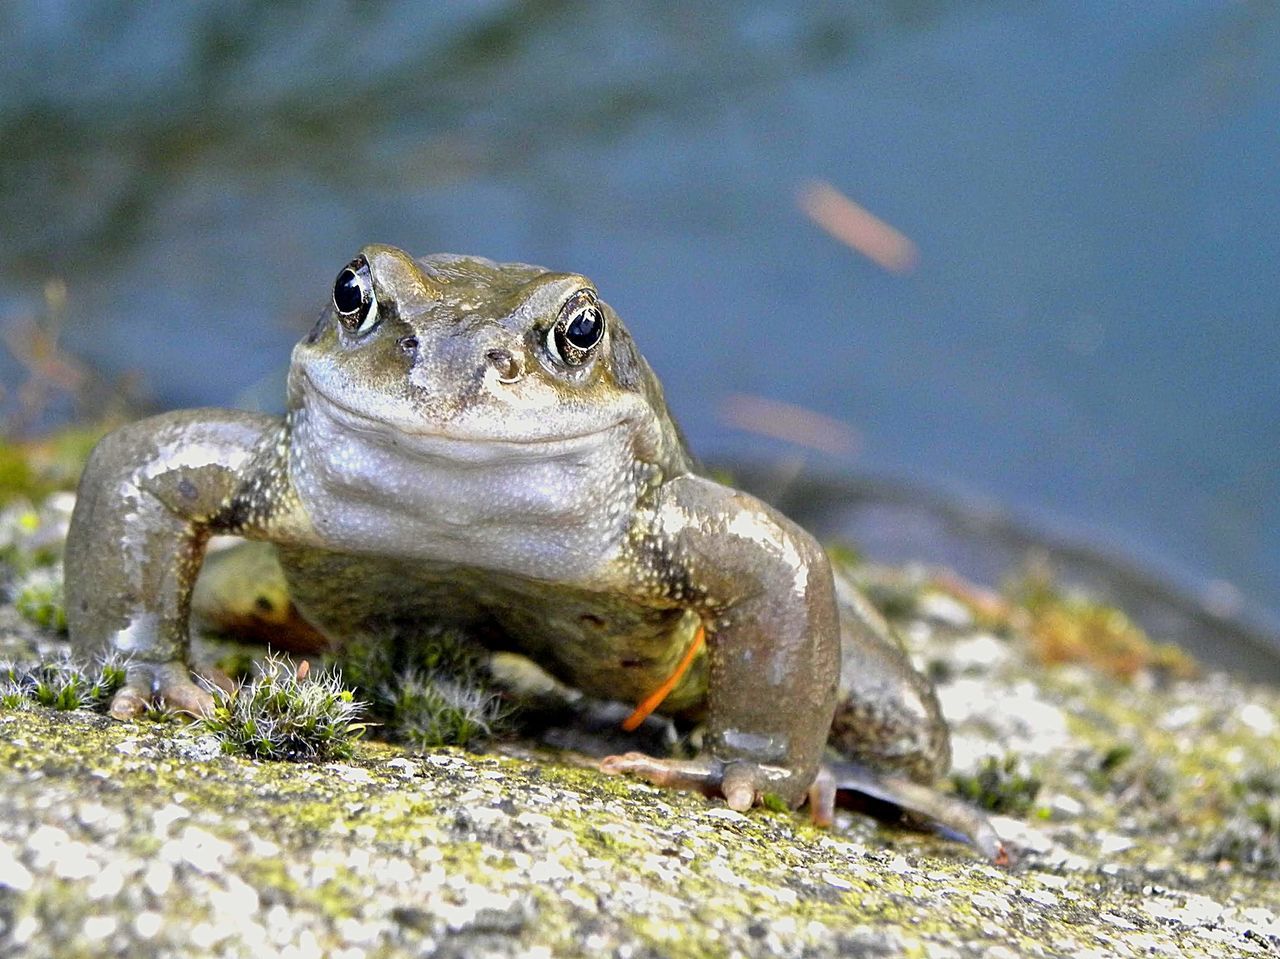 CLOSE-UP OF FROG ON SHORE